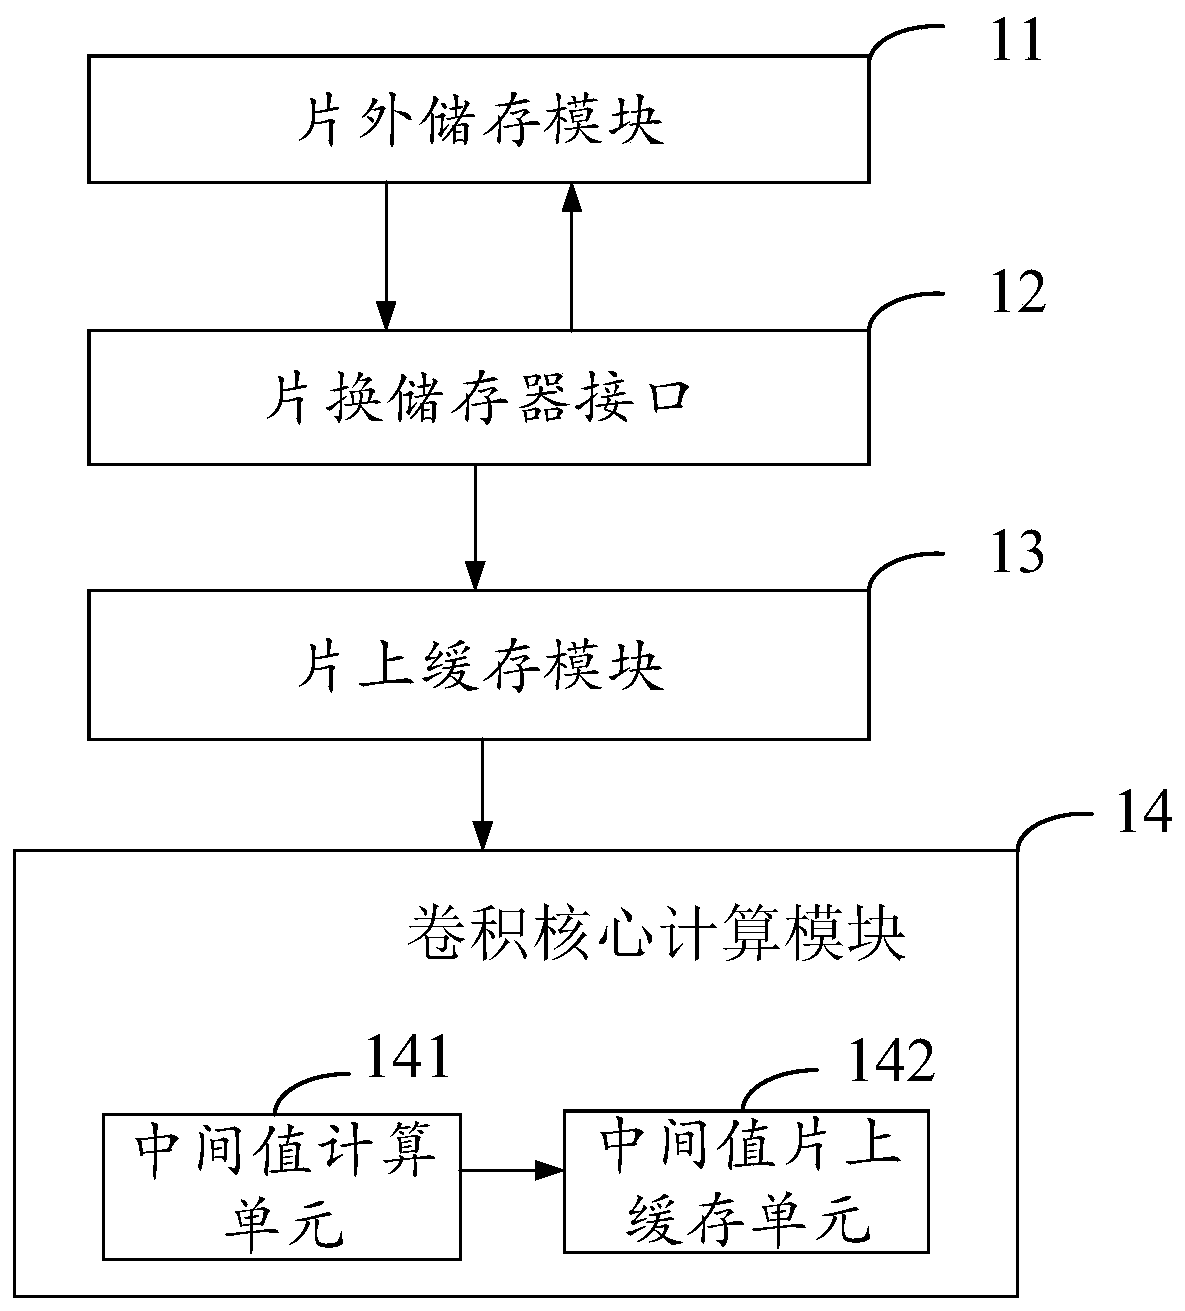 Convolutional neural network acceleration processing system and method based on FPGA, and terminal